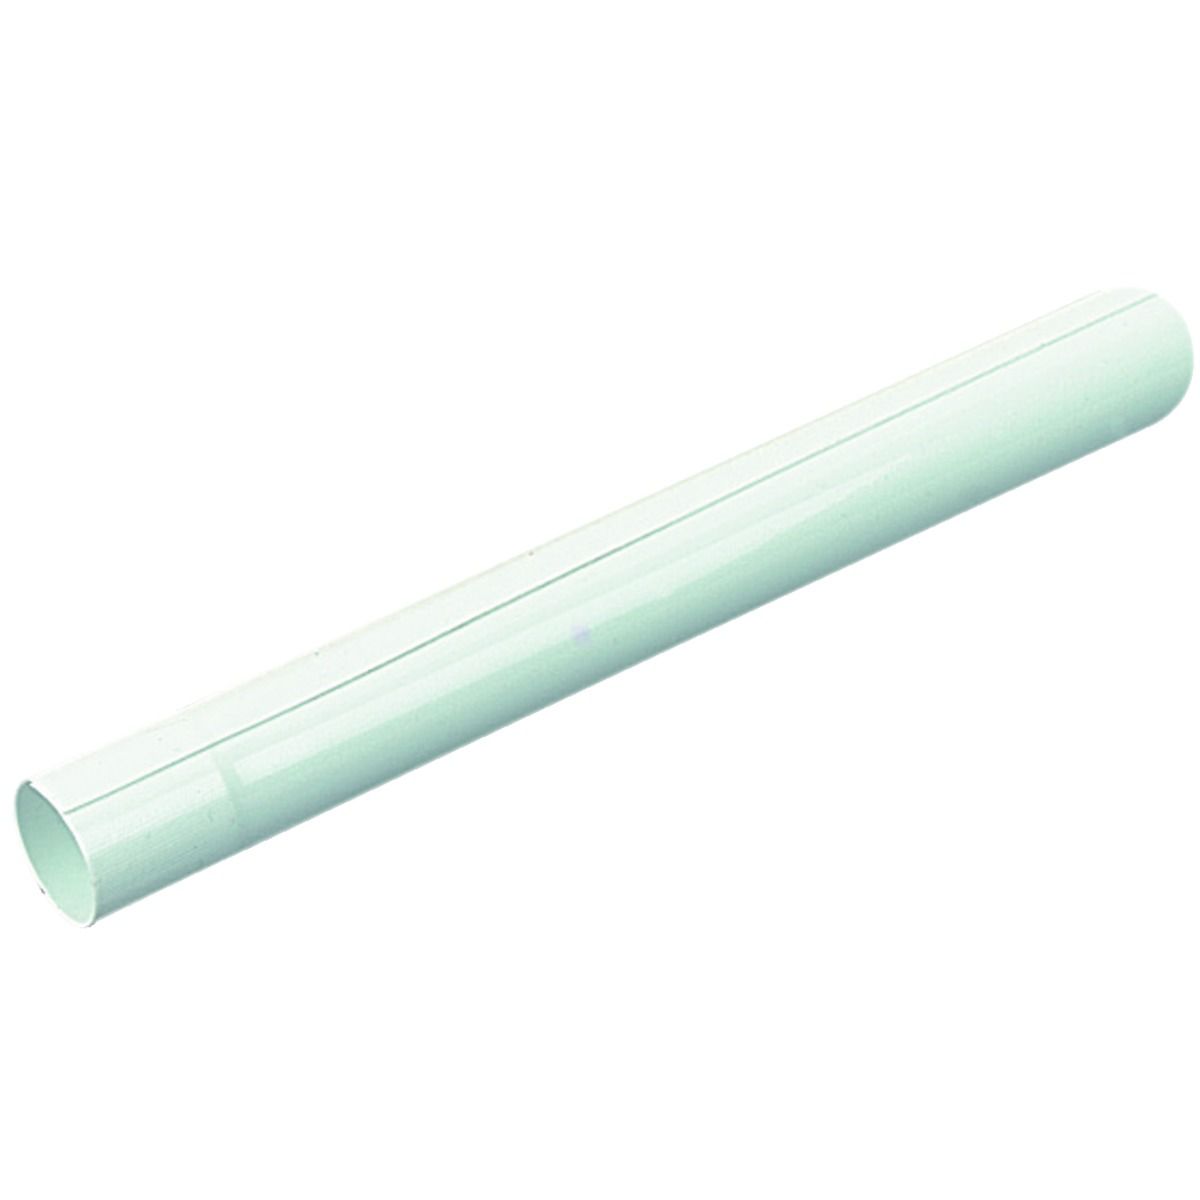 Image of Wickes White Radiator Pipe Snaps - 1m Pack of 3